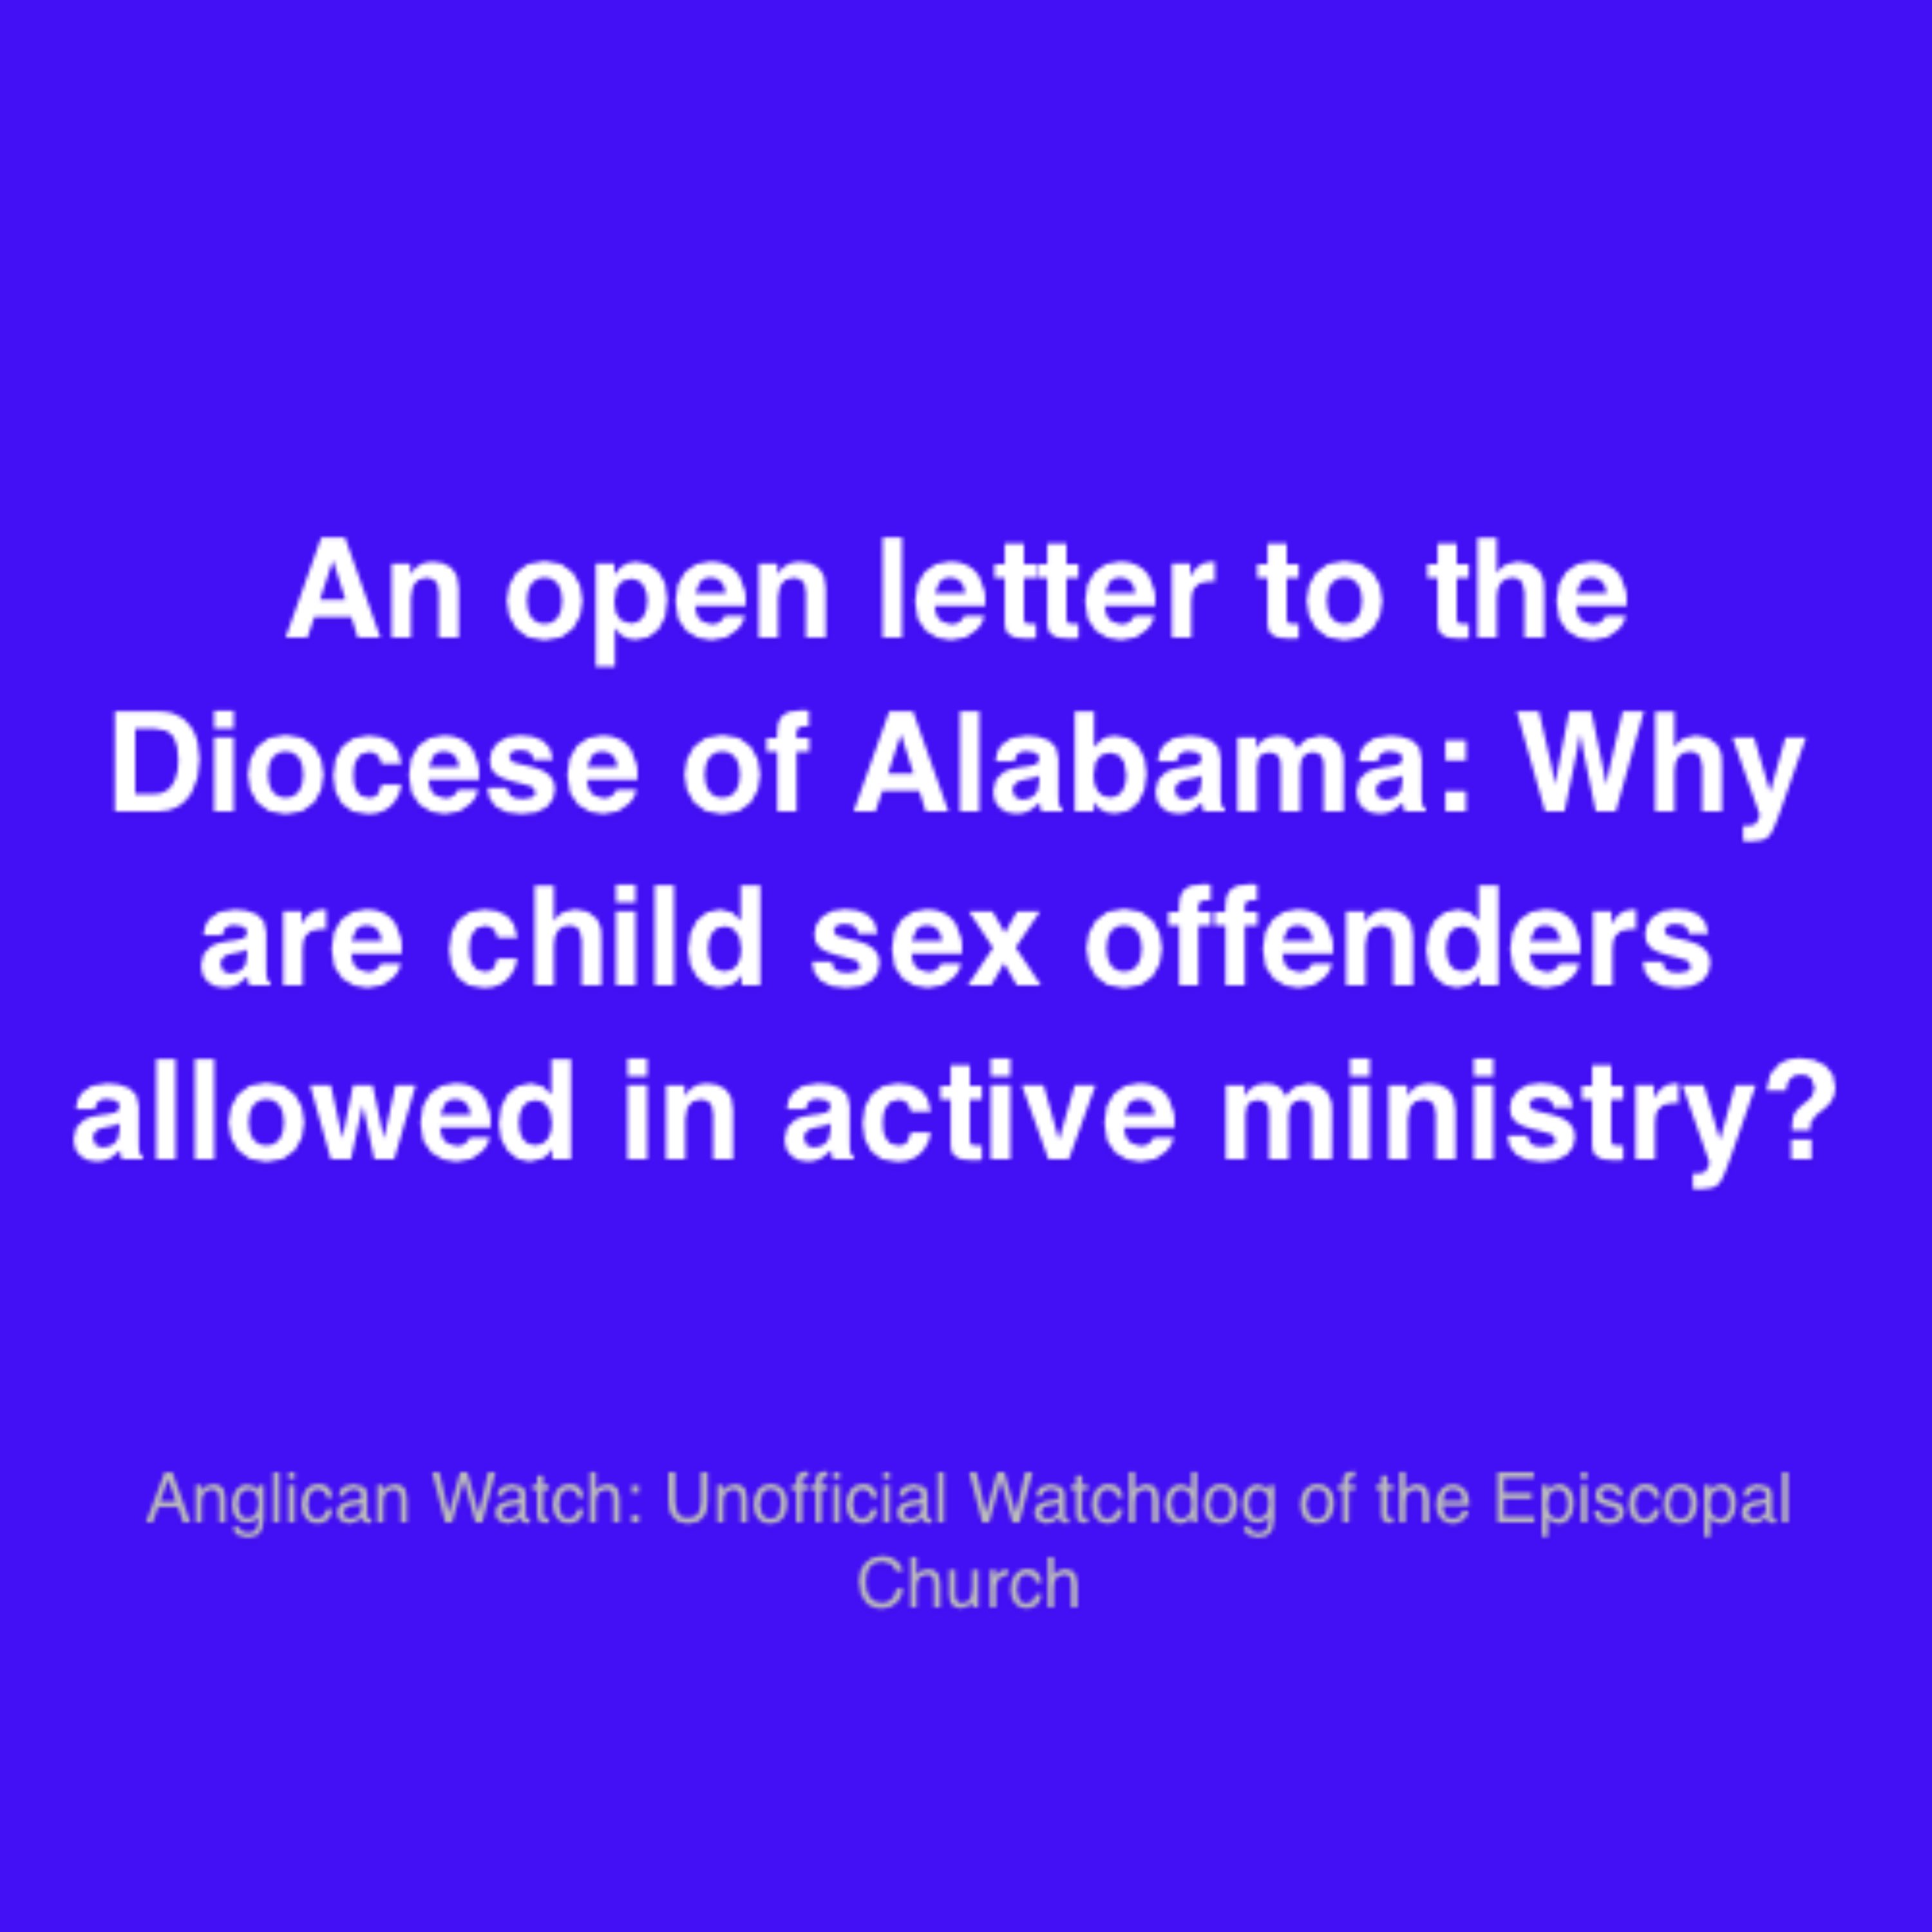 An open letter to the Diocese of Alabama: Why are child sex offenders allowed in active ministry?